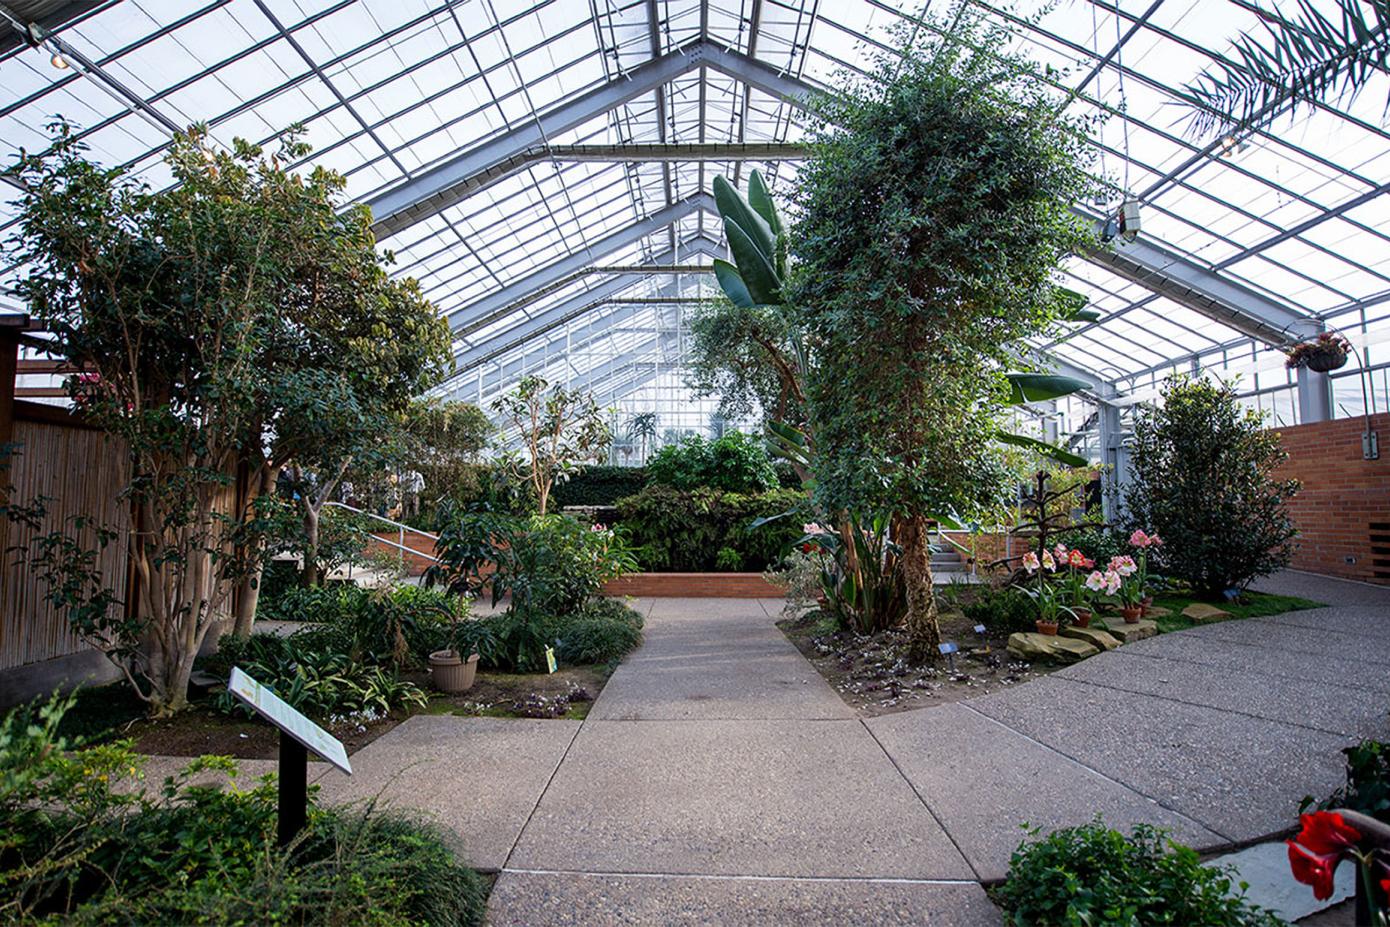 A view of the temperate house